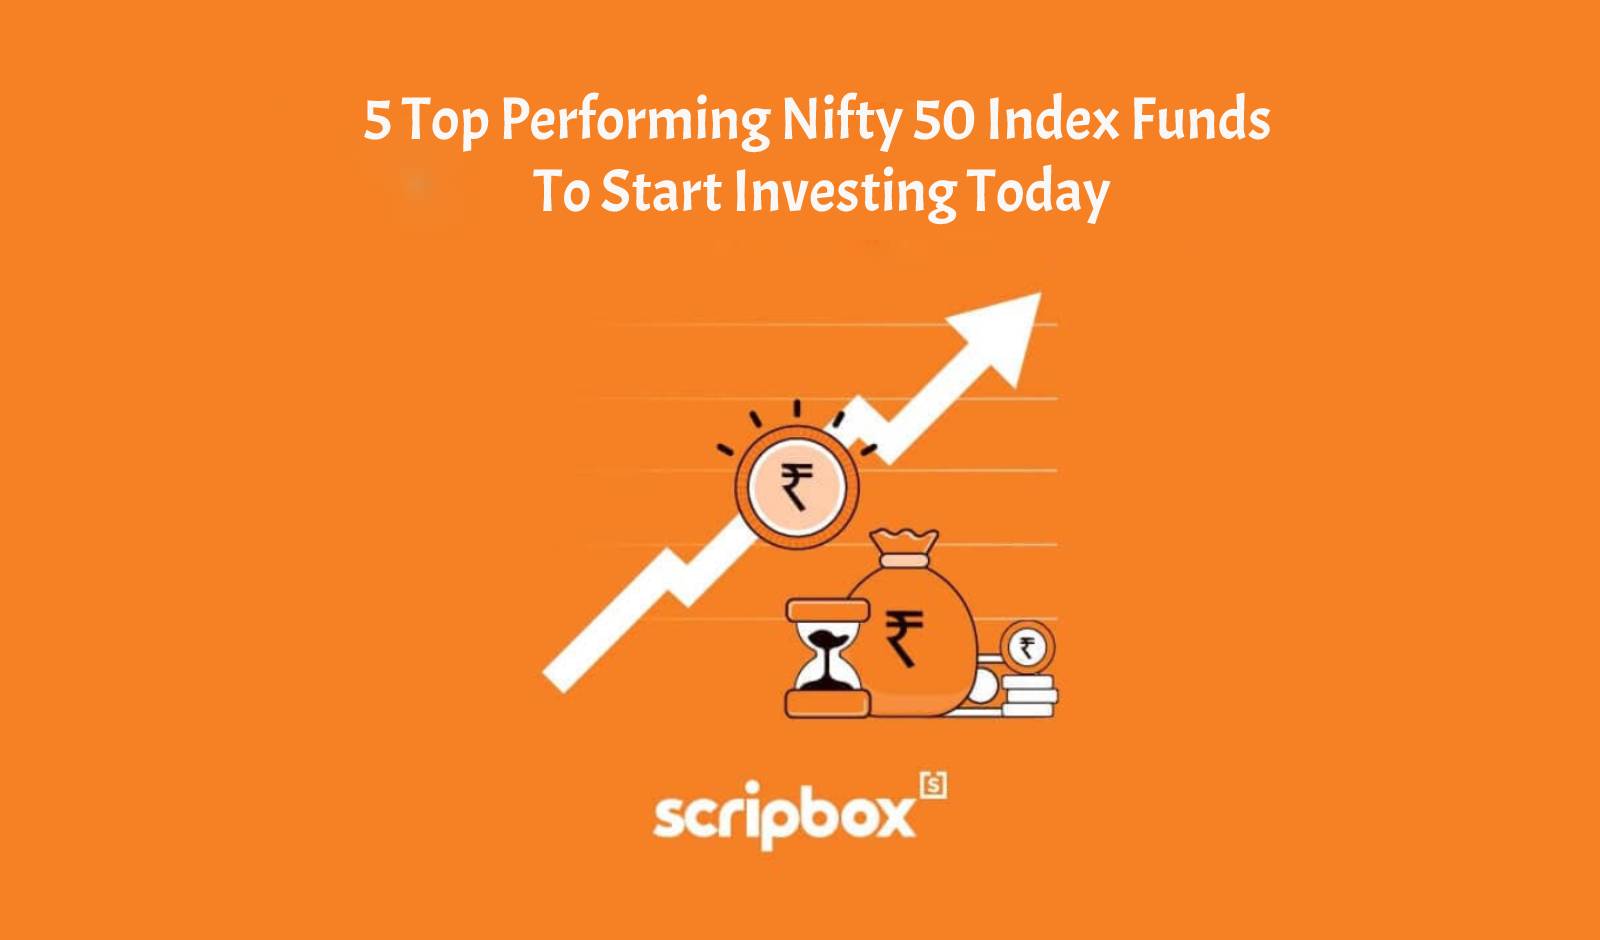 Top Performing Nifty 50 Index Funds